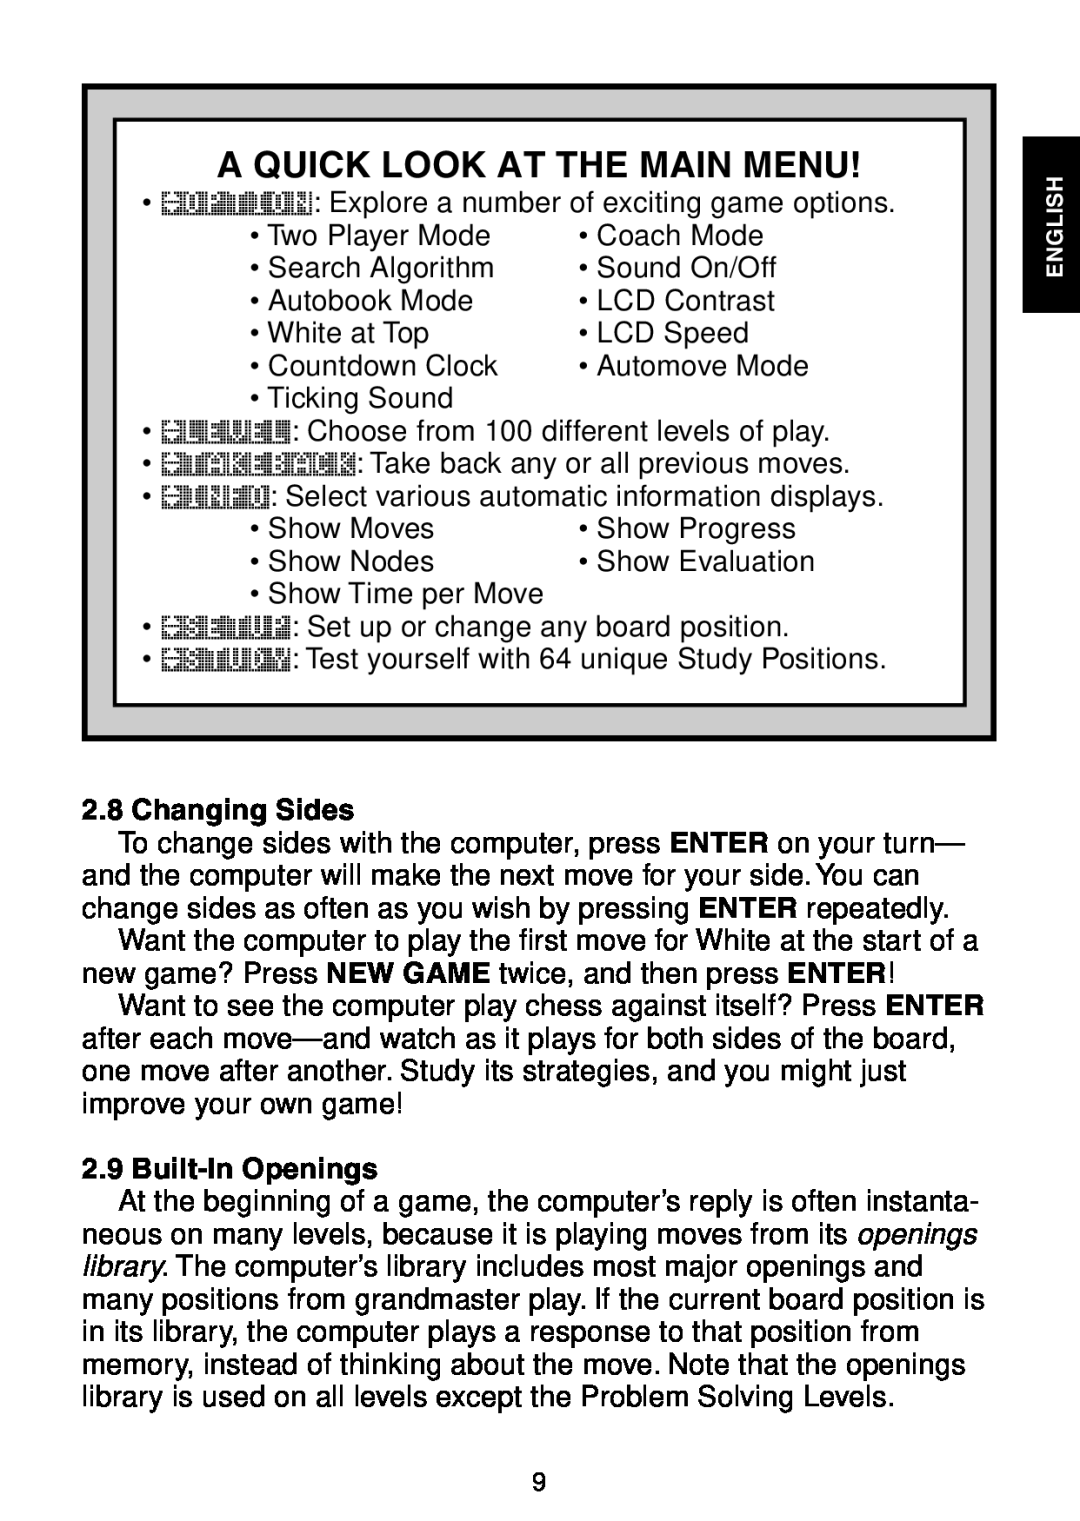 Saitek Maestro Travel Chess Computer manual A Quick Look At The Main Menu, Changing Sides, Built-In Openings 